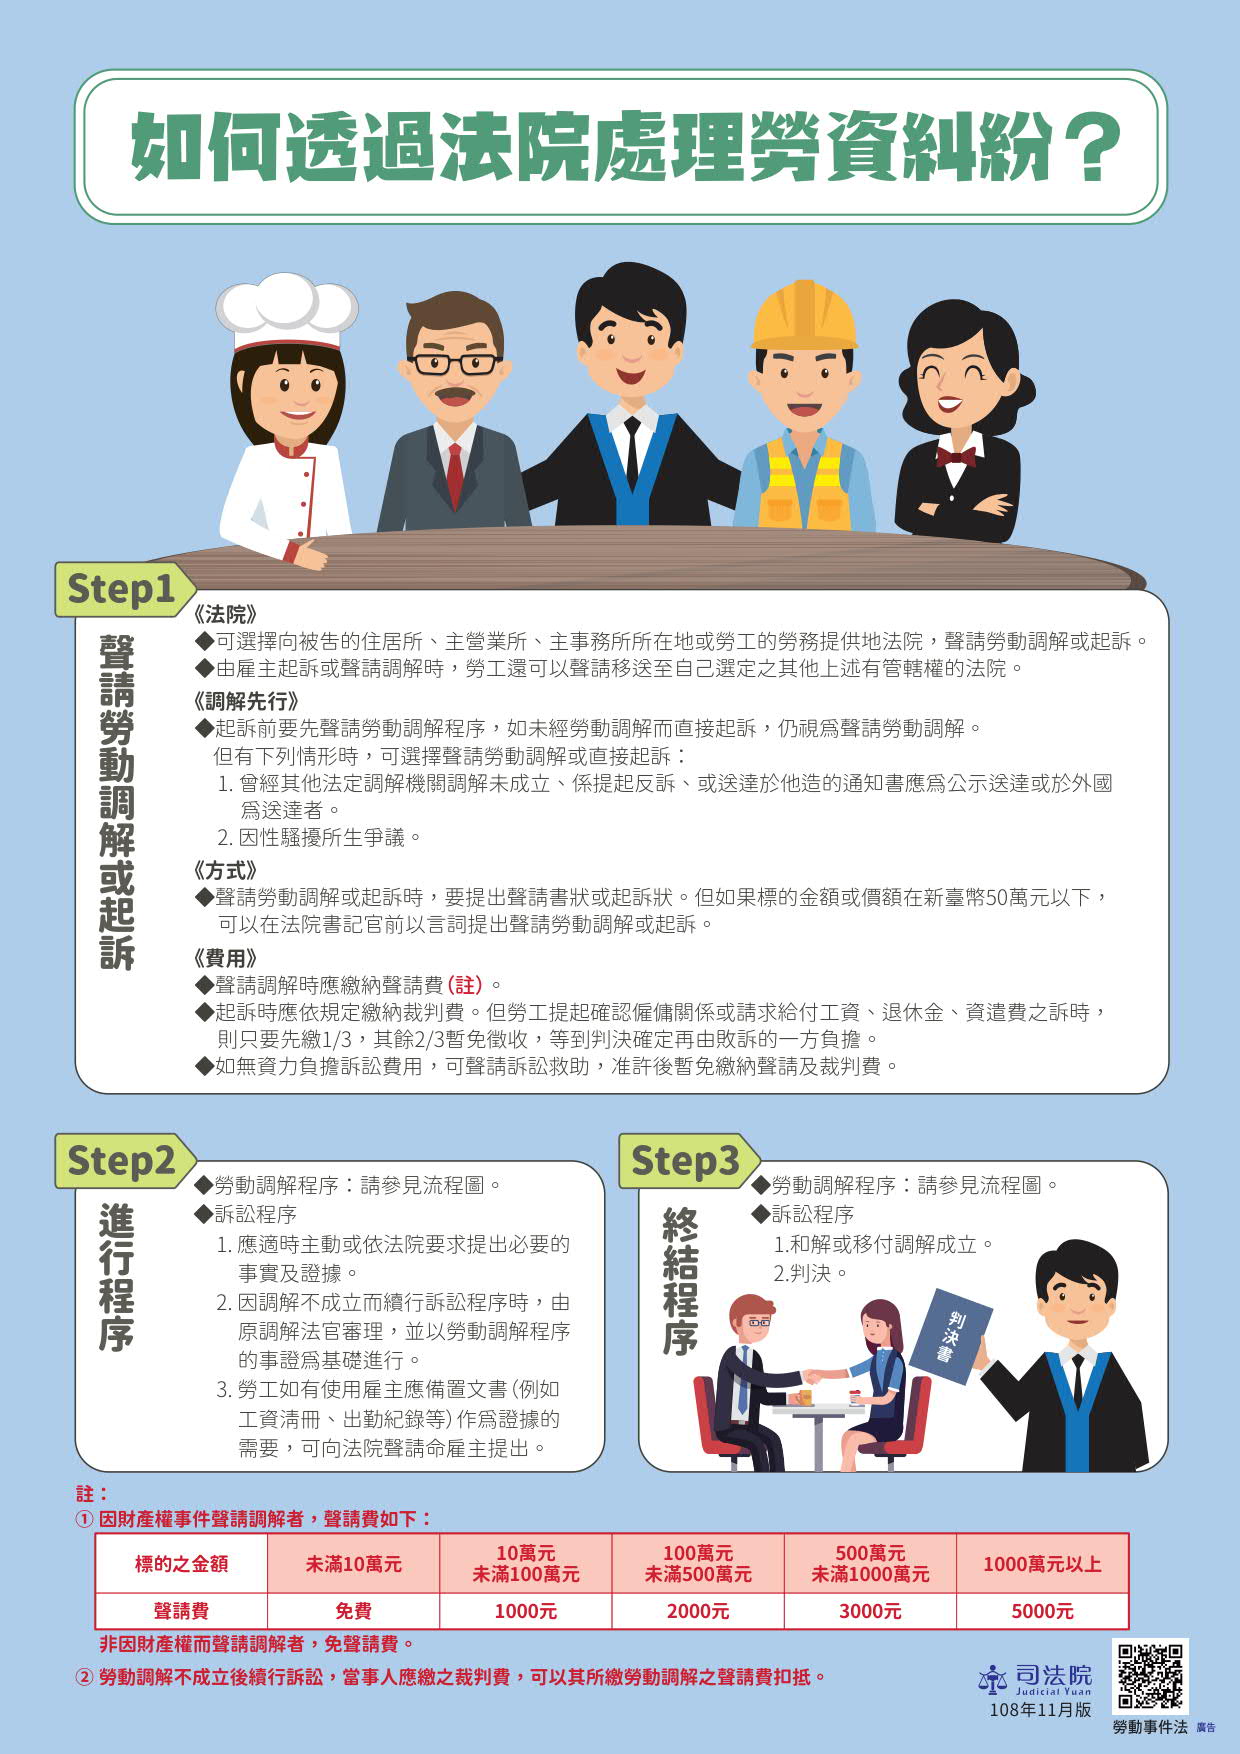 The Judicial Yuan produced a 5-language "Labor Incident Act Promotion Sheet". (Photo / Provided by the Judicial Yuan)